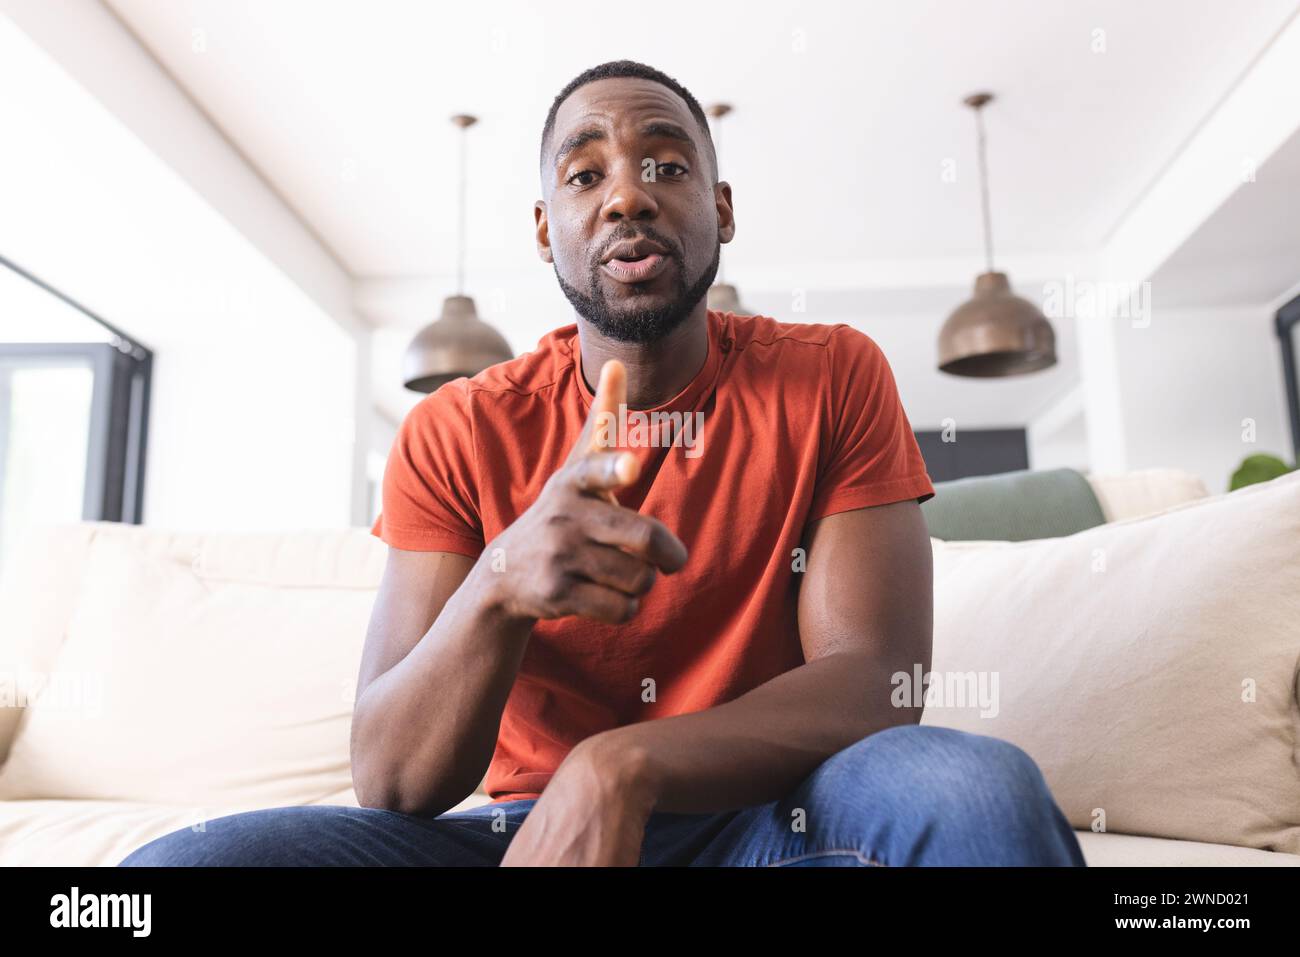 African American man in a red shirt is pointing towards the camera on a video call Stock Photo